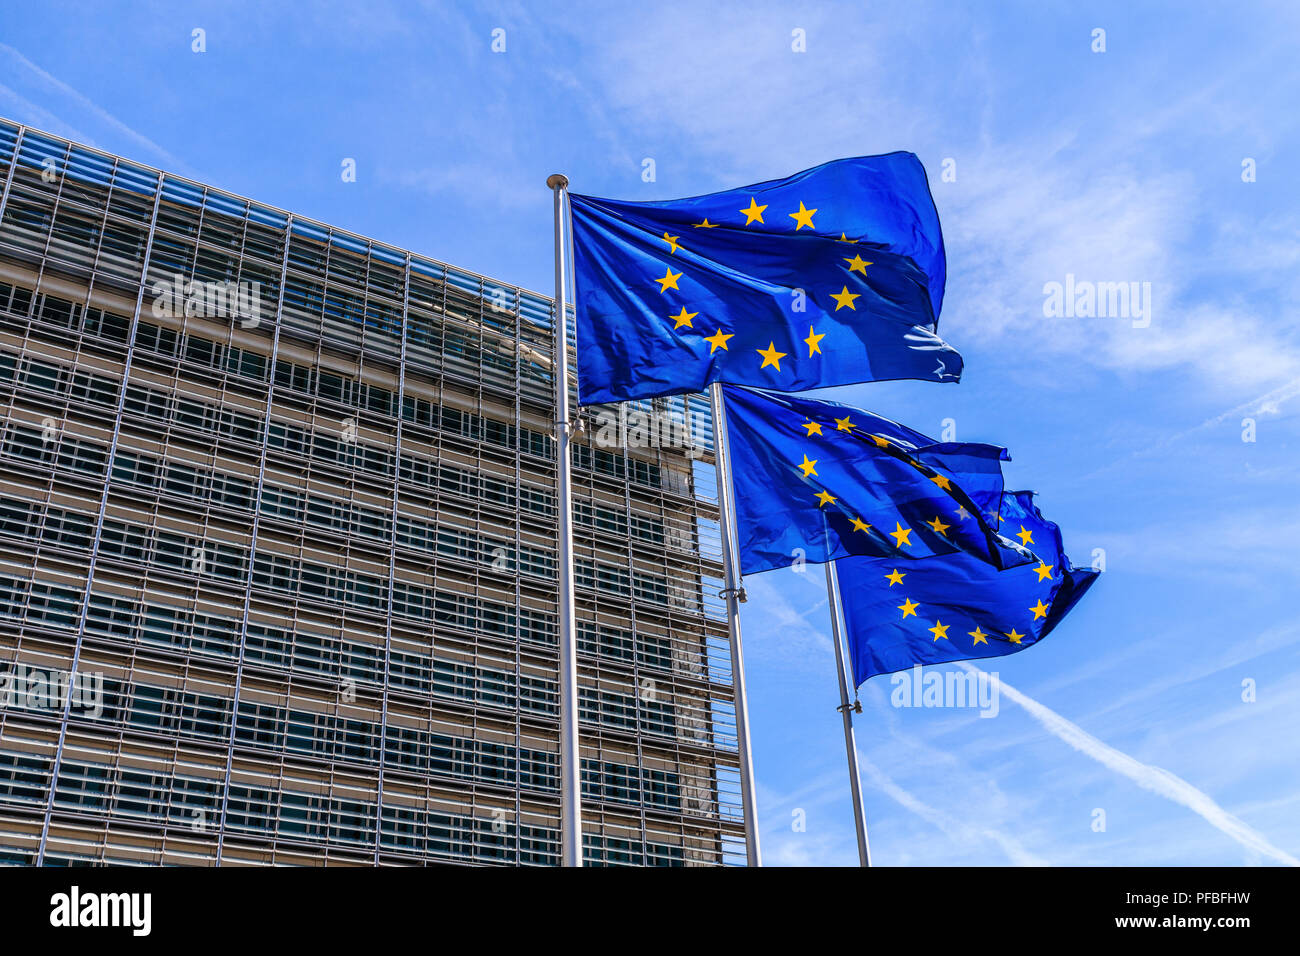 Brussels, Belgium - August 11, 2018: Flags of the European Union in front of the Berlaymont building in Brussels. Stock Photo